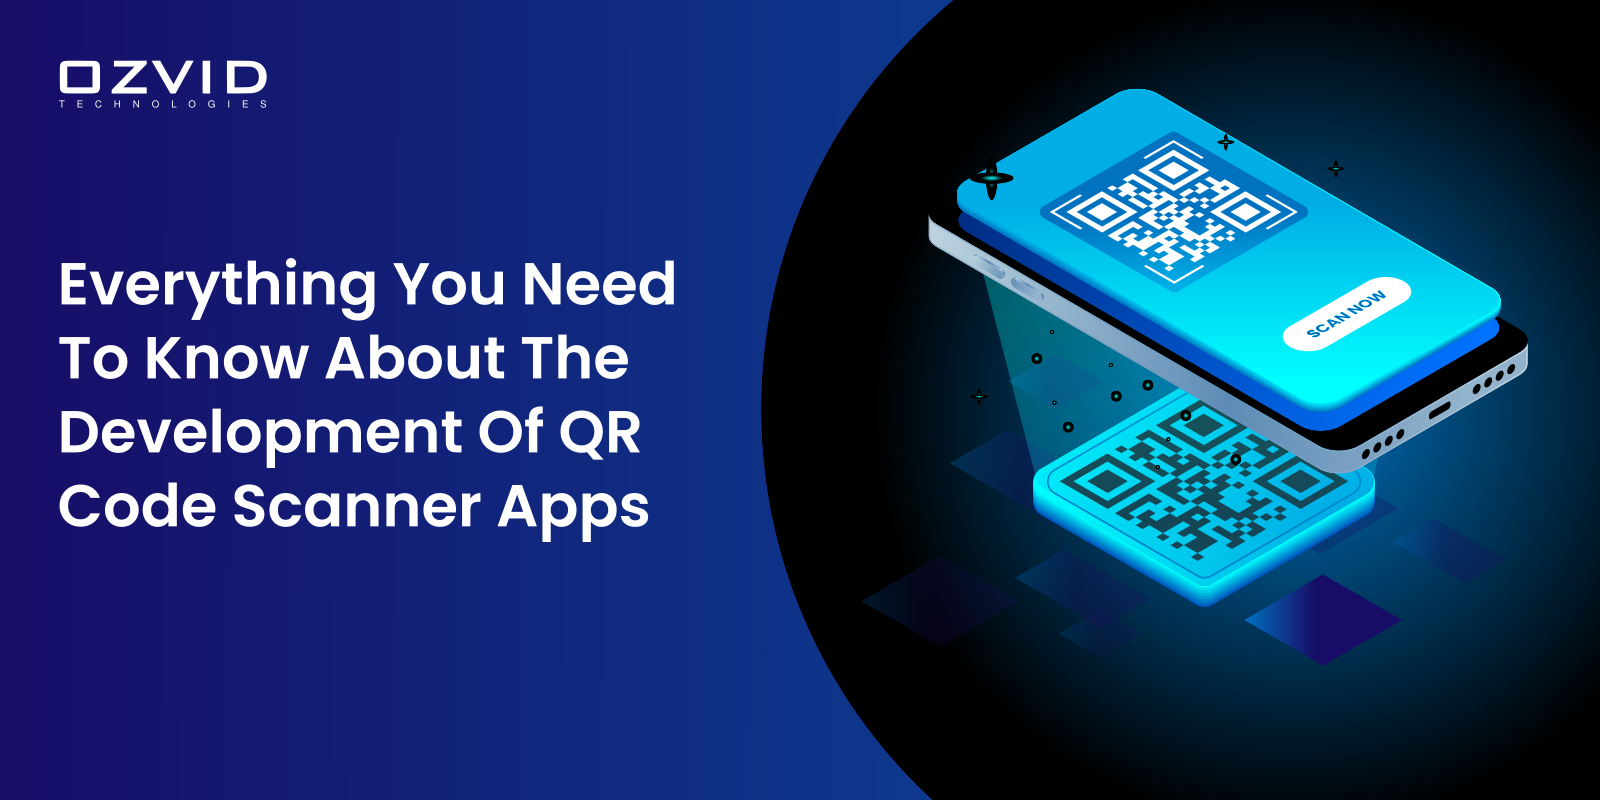 Everything You Need To Know About The Development Of QR Code Scanner Apps